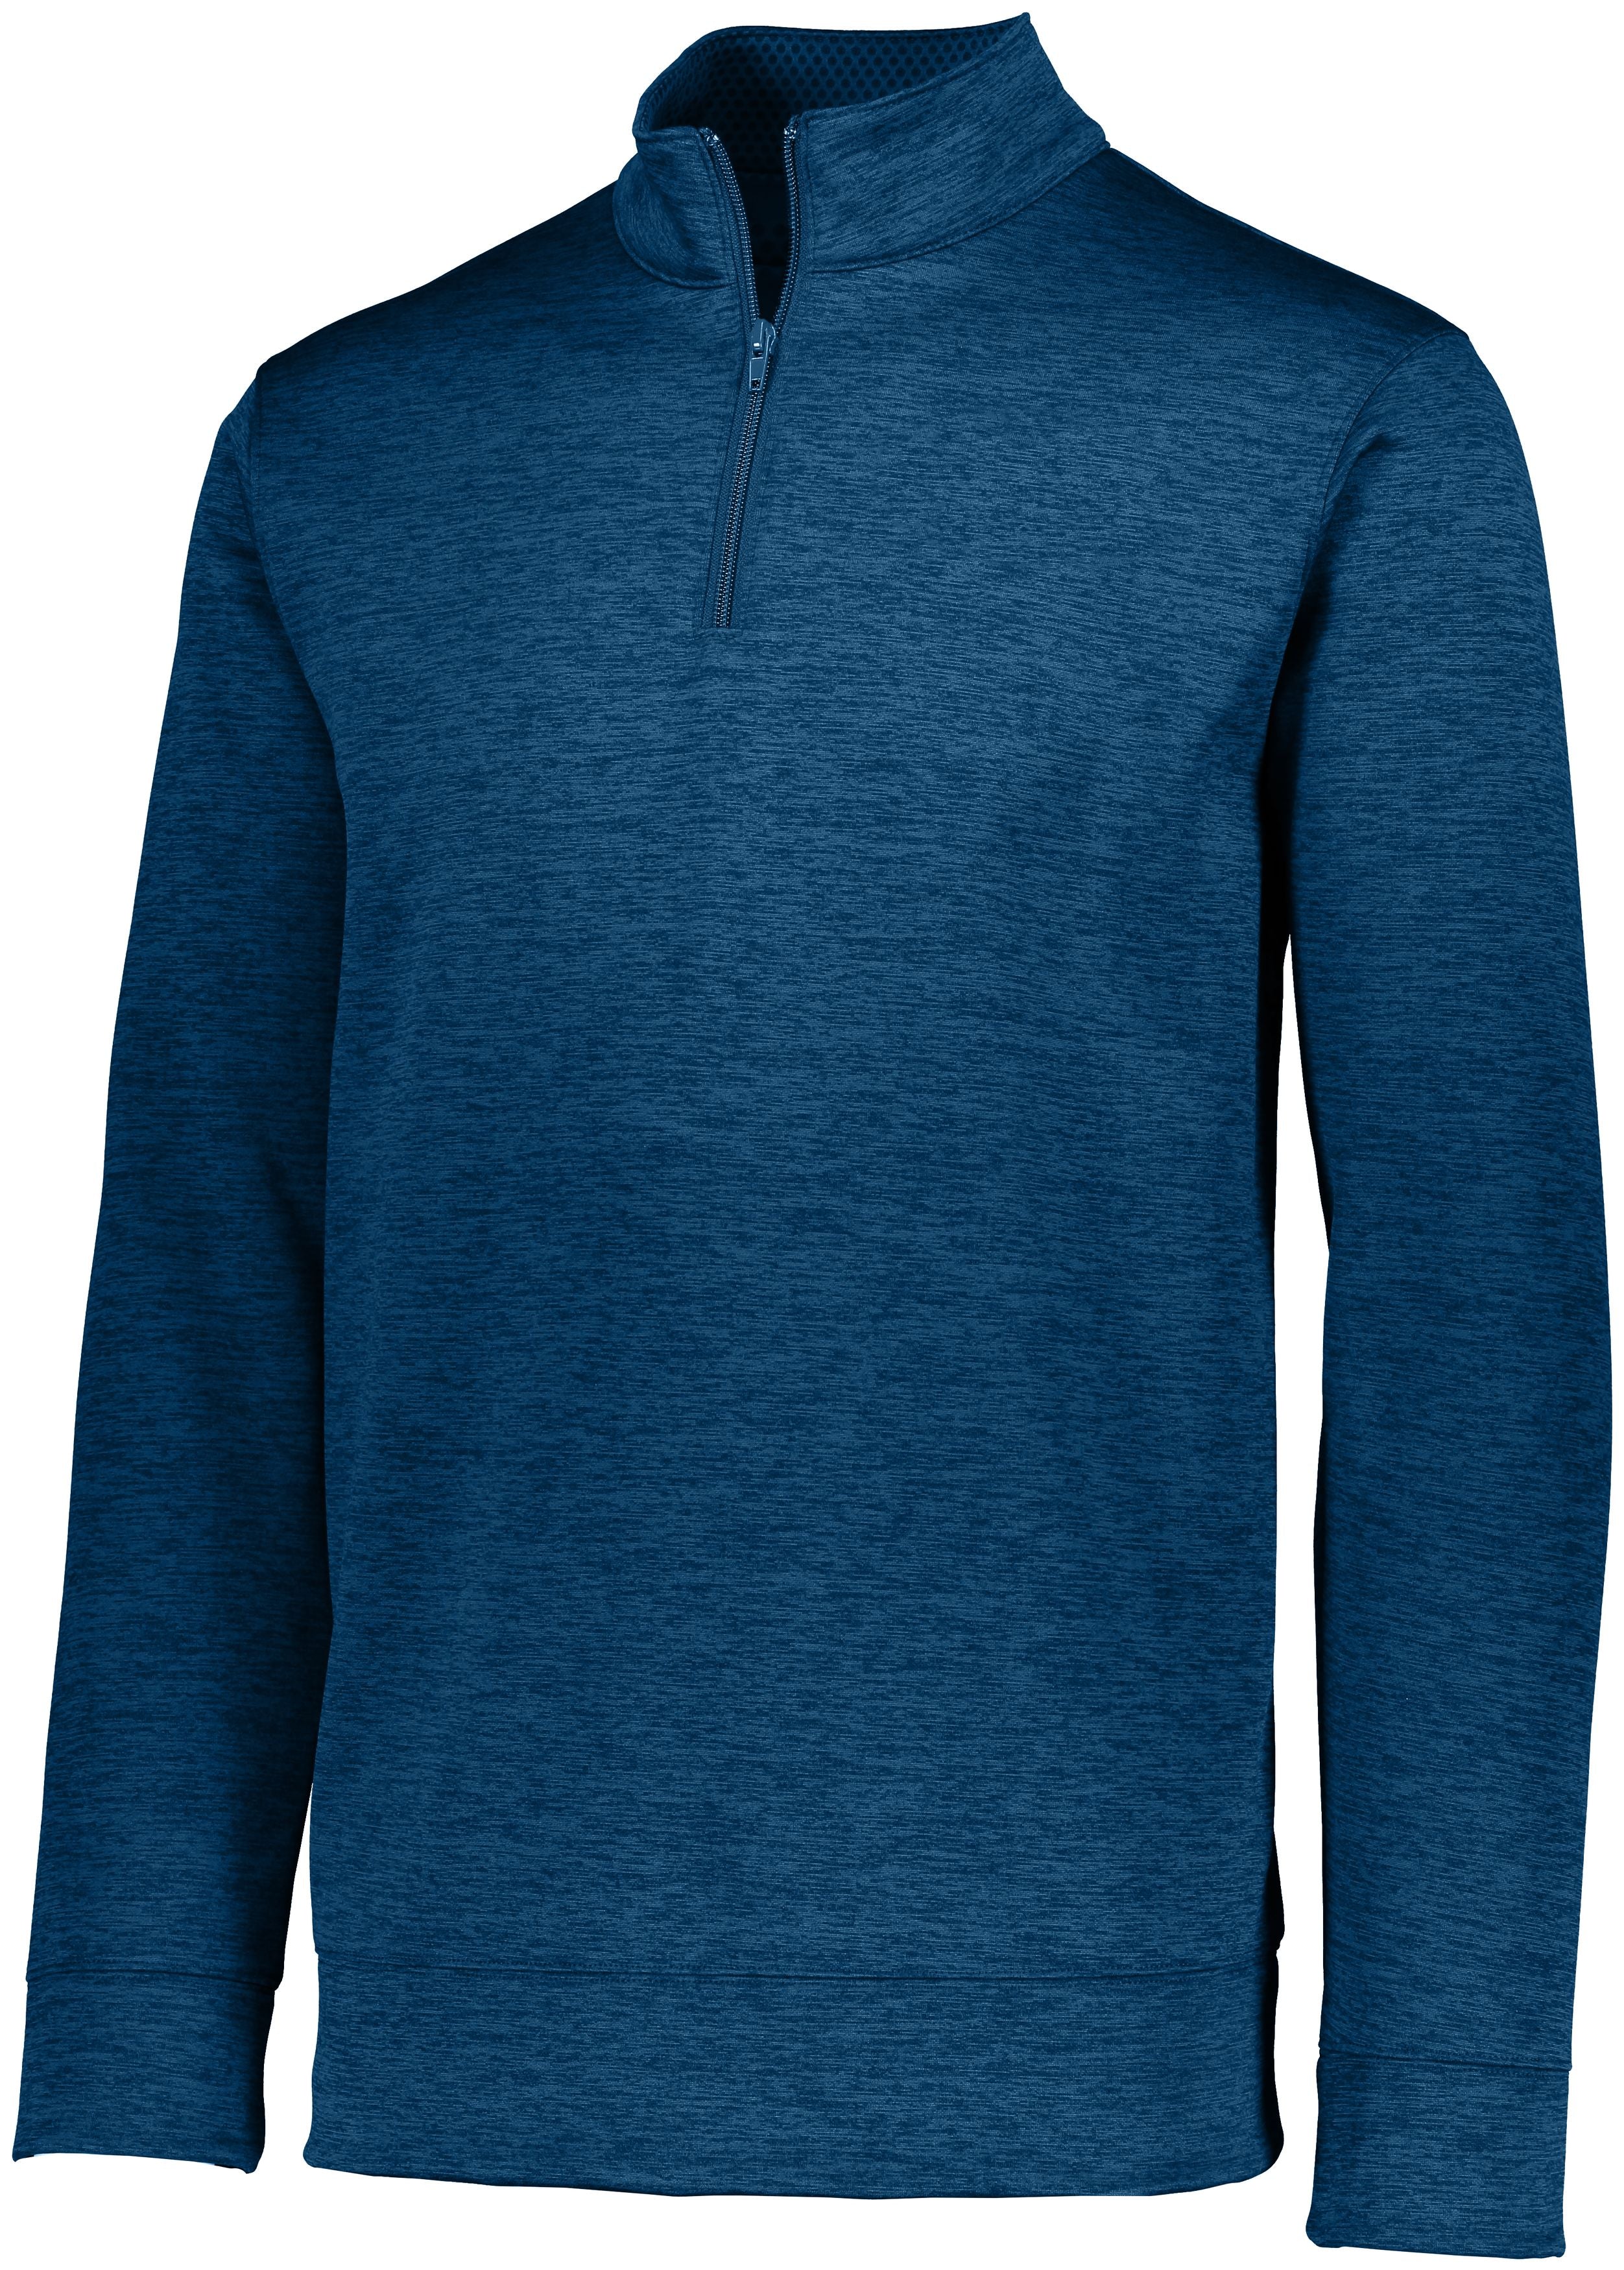 Augusta Sportswear Stoked Tonal Heather Pullover in Navy  -Part of the Adult, Adult-Pullover, Augusta-Products, Outerwear, Tonal-Fleece-Collection product lines at KanaleyCreations.com